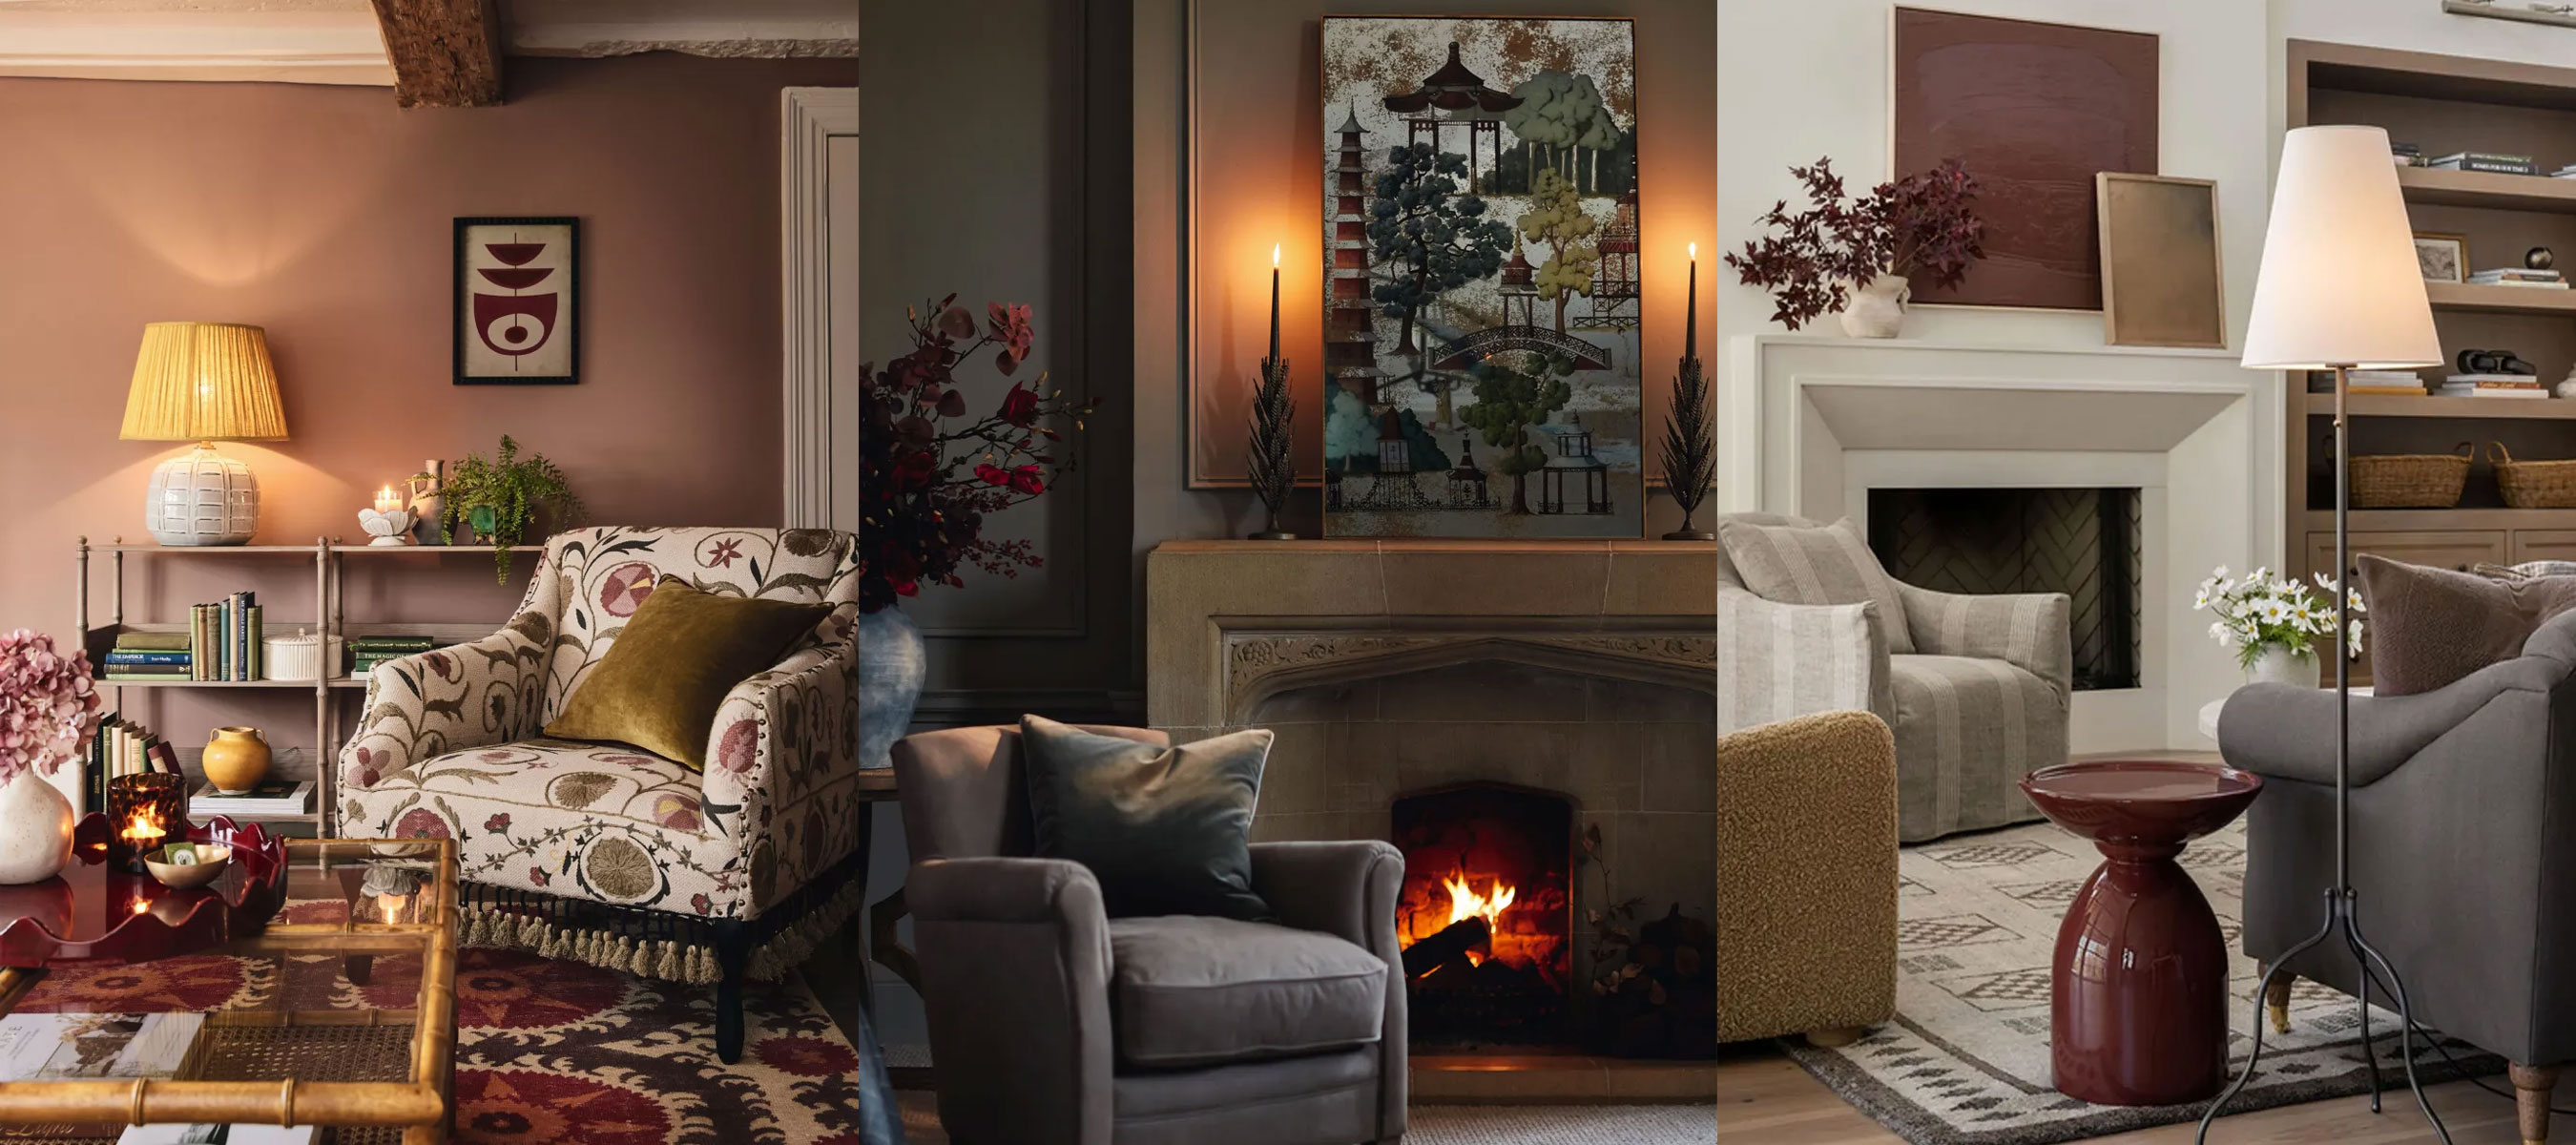 Living room fall decor: 18 ideas to decorate for the season |